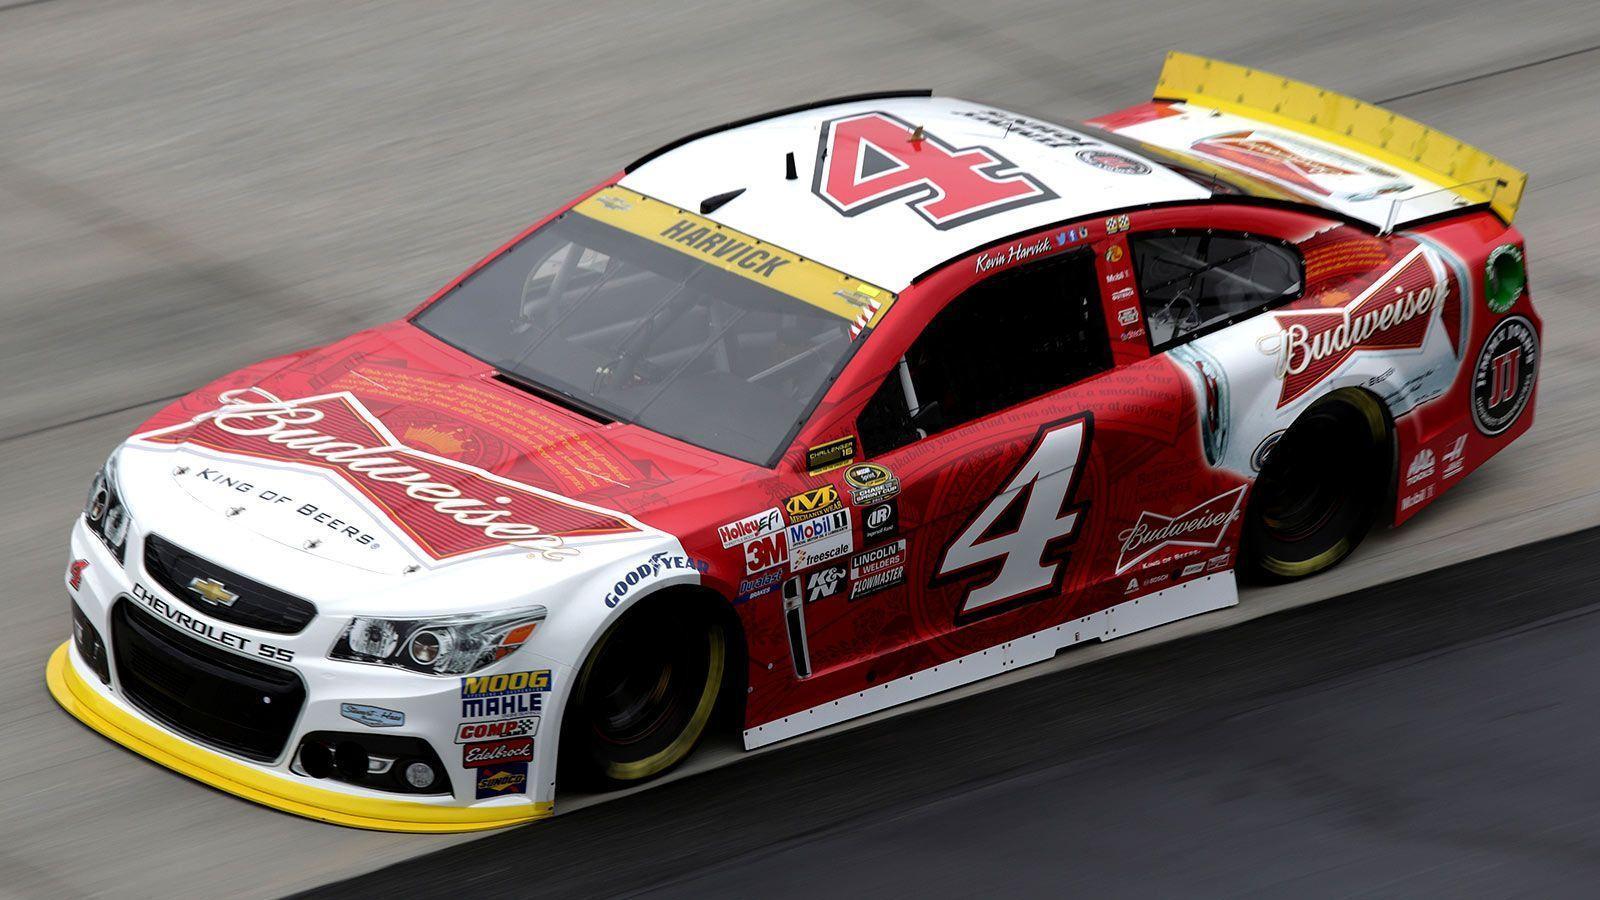 Final Sprint Cup Series practice results: Kevin Harvick leads